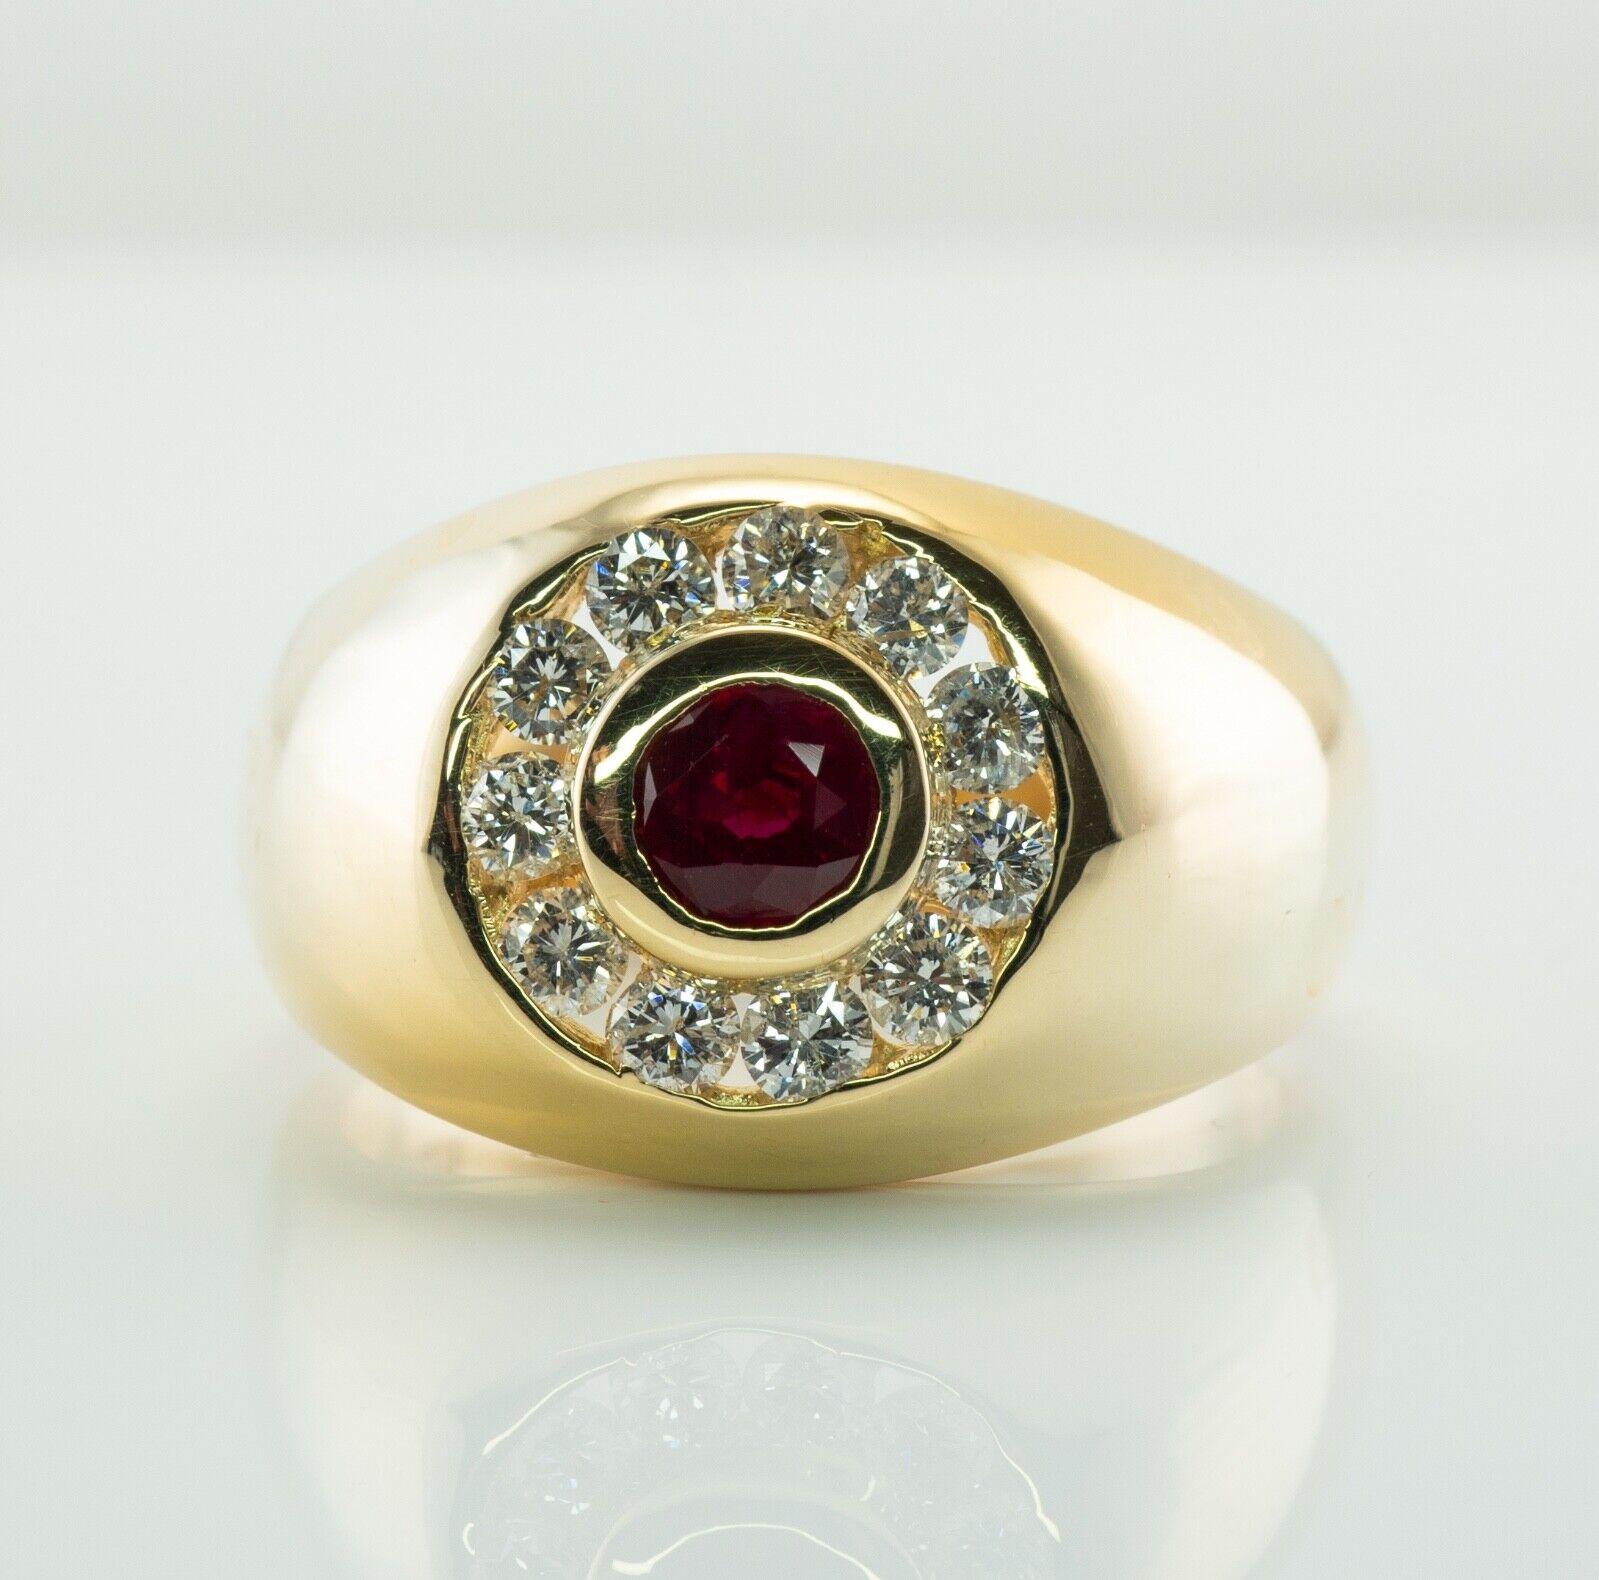 This gorgeous estate ring for a gentleman is finely crafted in solid 14K Yellow Gold. The center genuine Earth mined round cut Ruby measures 4.2 mm (.36 carat). This is a very clean and transparent gem of great intensity and strong brilliance.